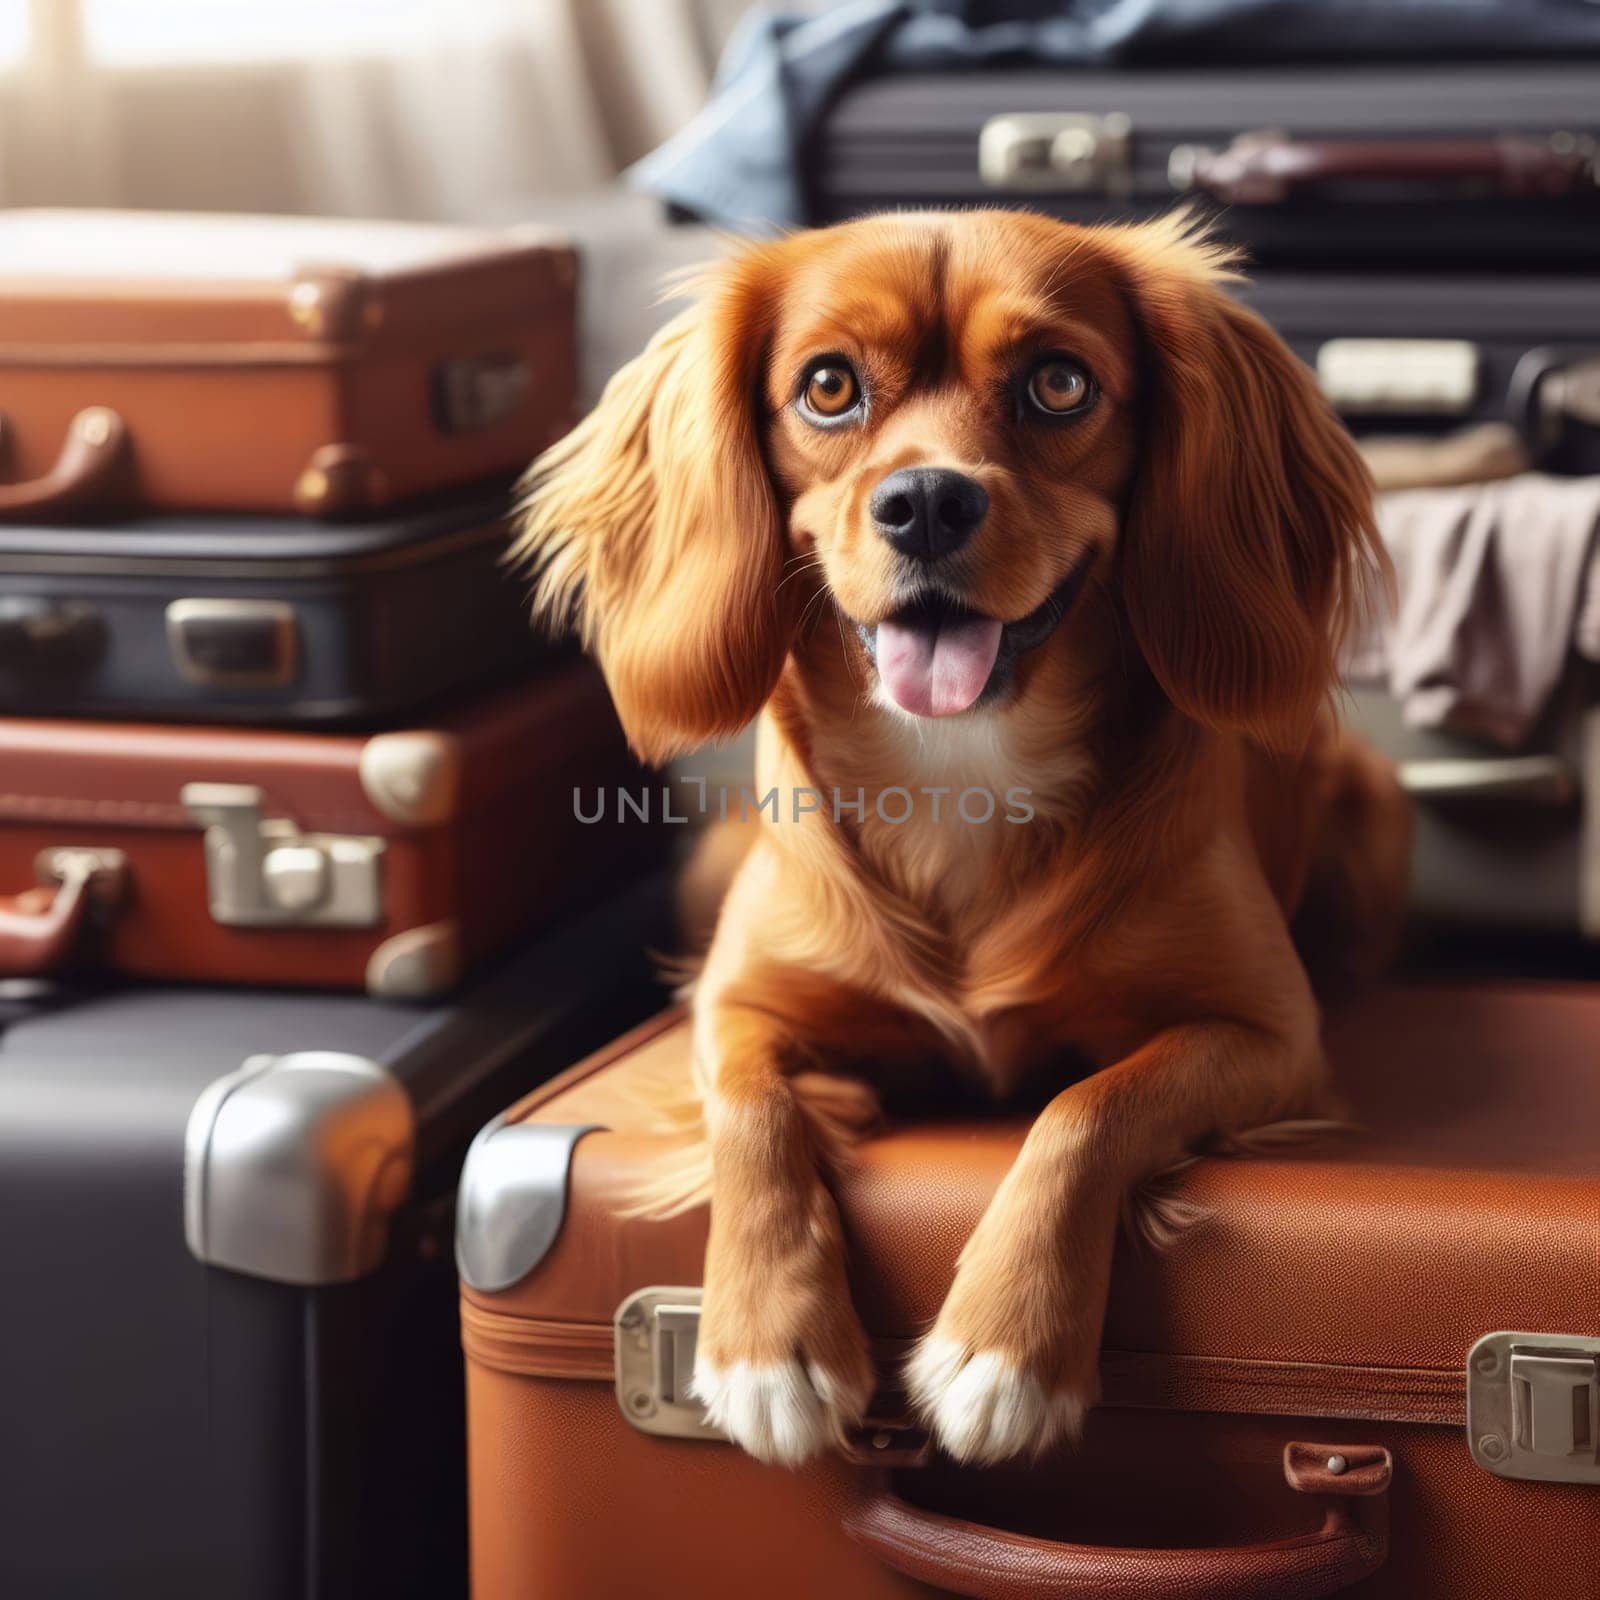 A cute red dog sitting on a suitcase with other luggage in the background. by sfinks